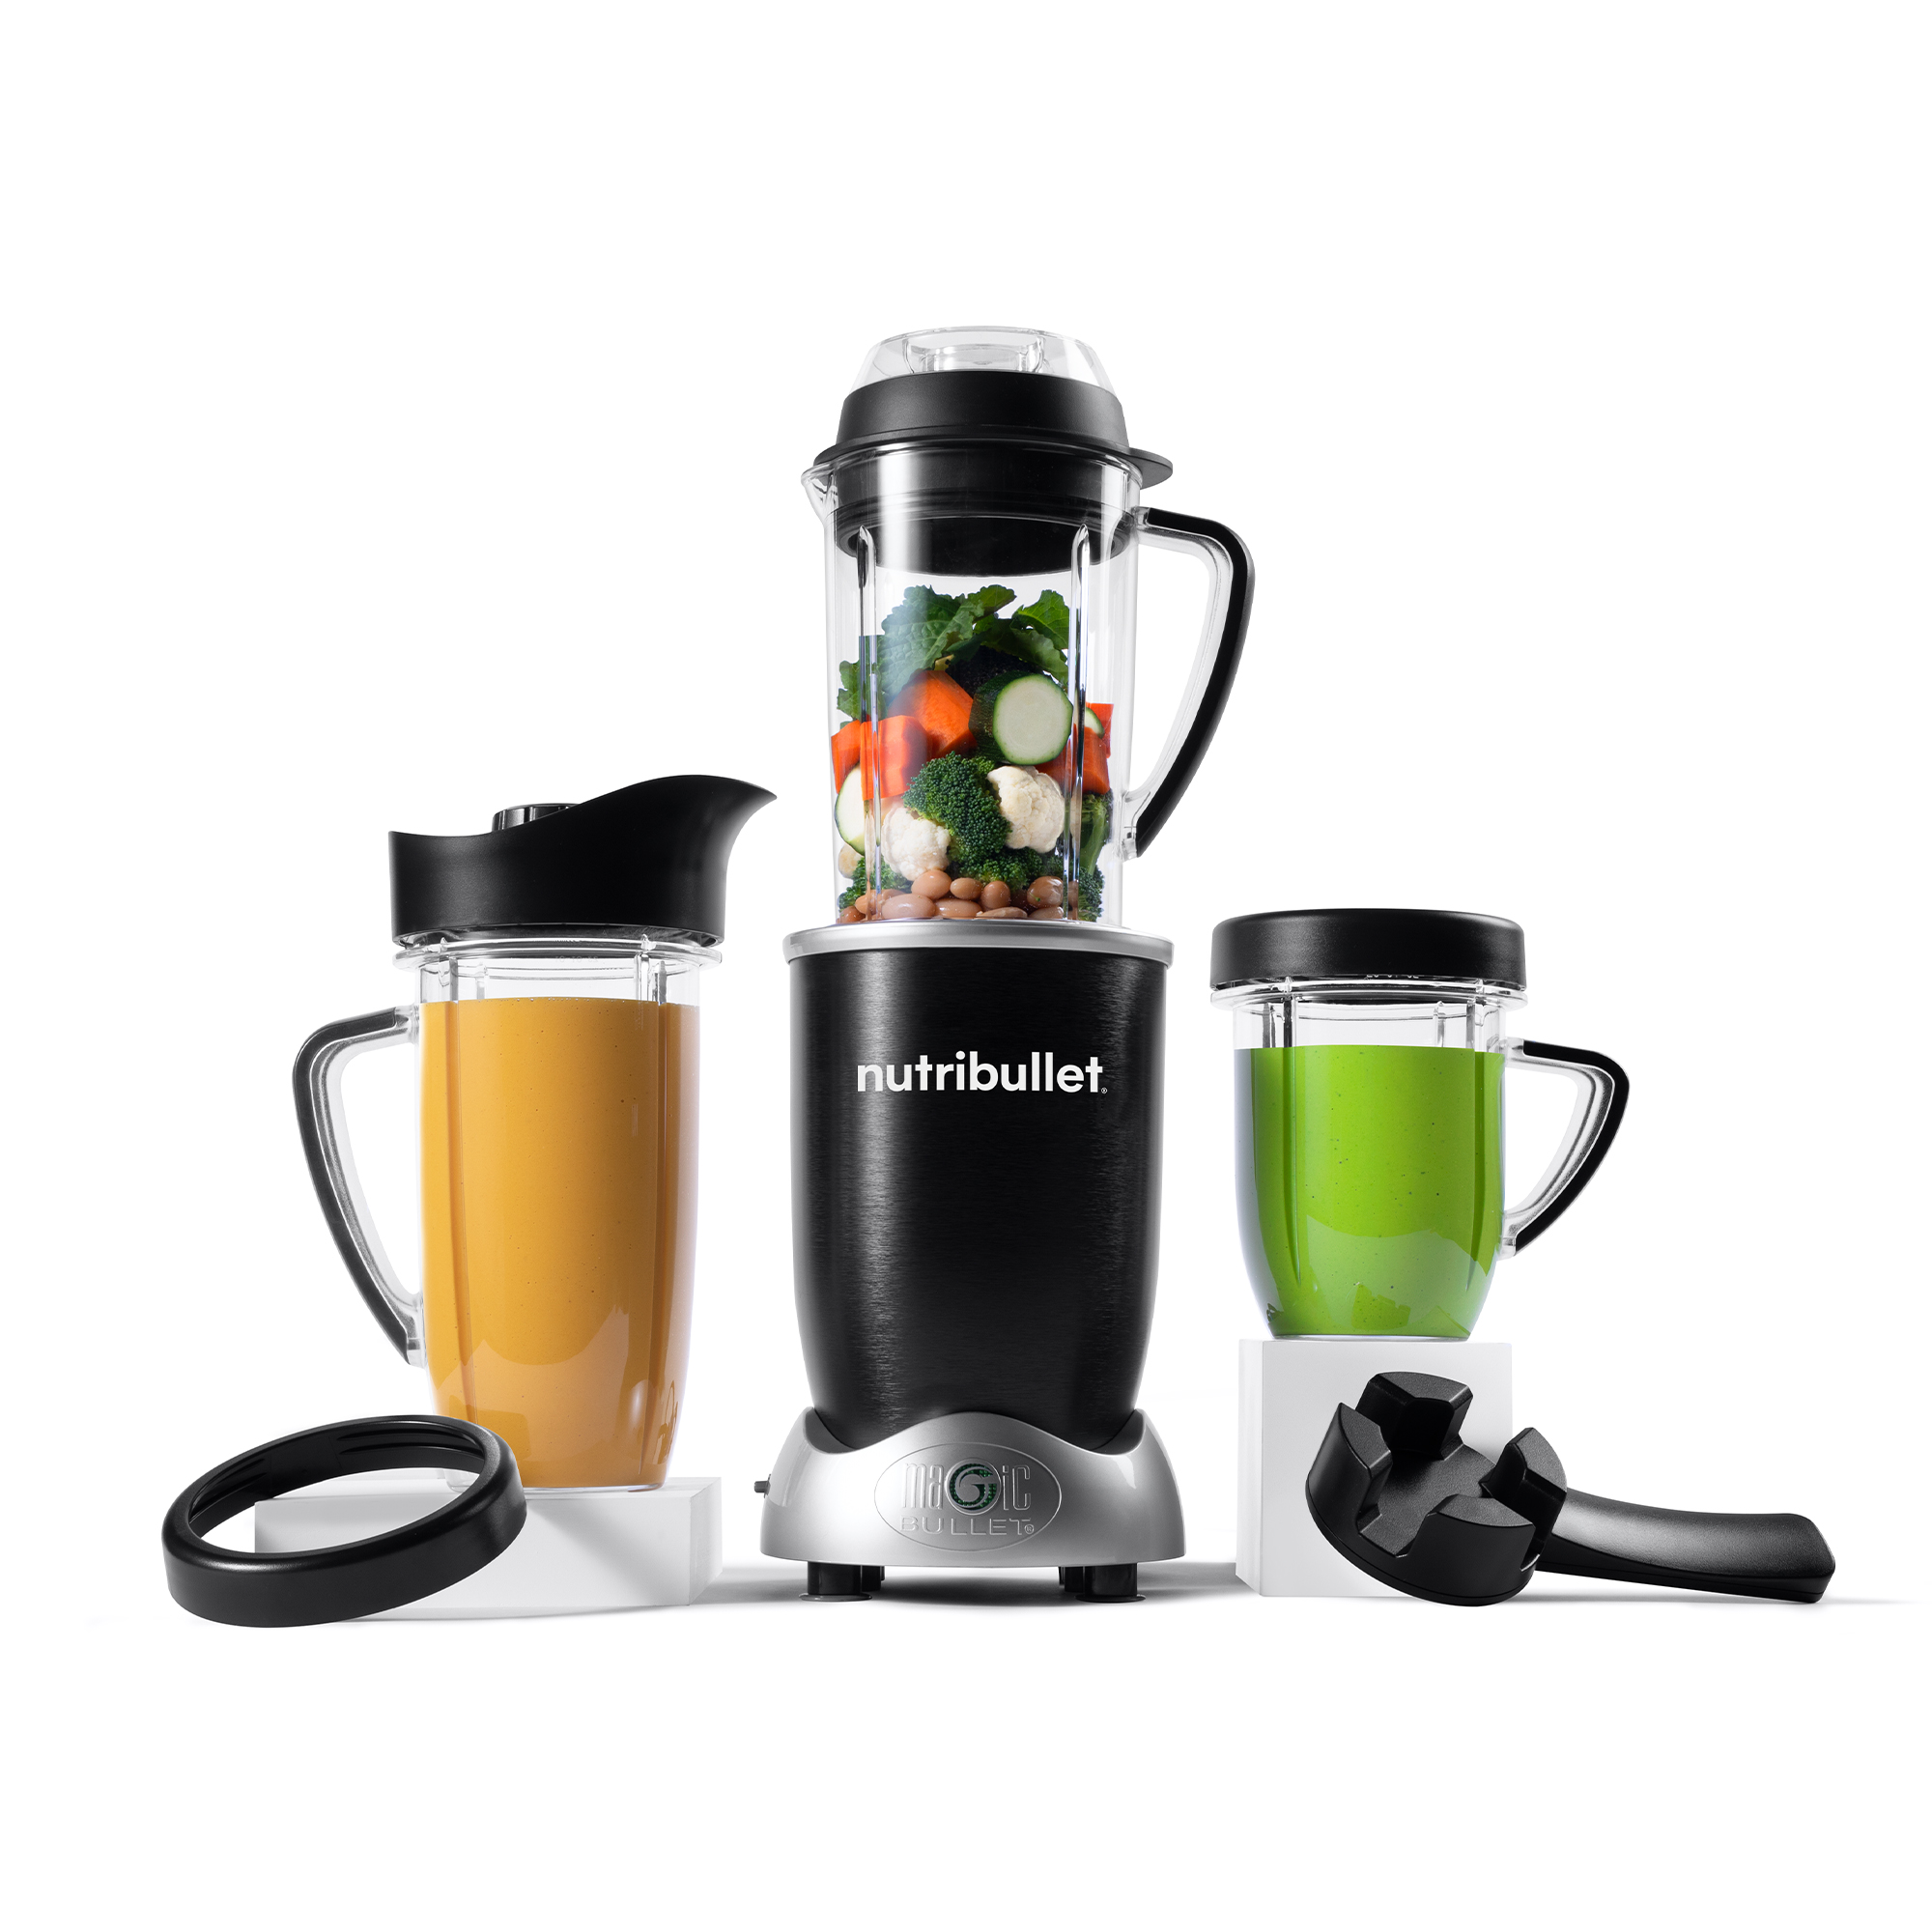 NutriBullet RX Blender Smart Technology with Auto Start and Stop, 10 Piece - image 1 of 19